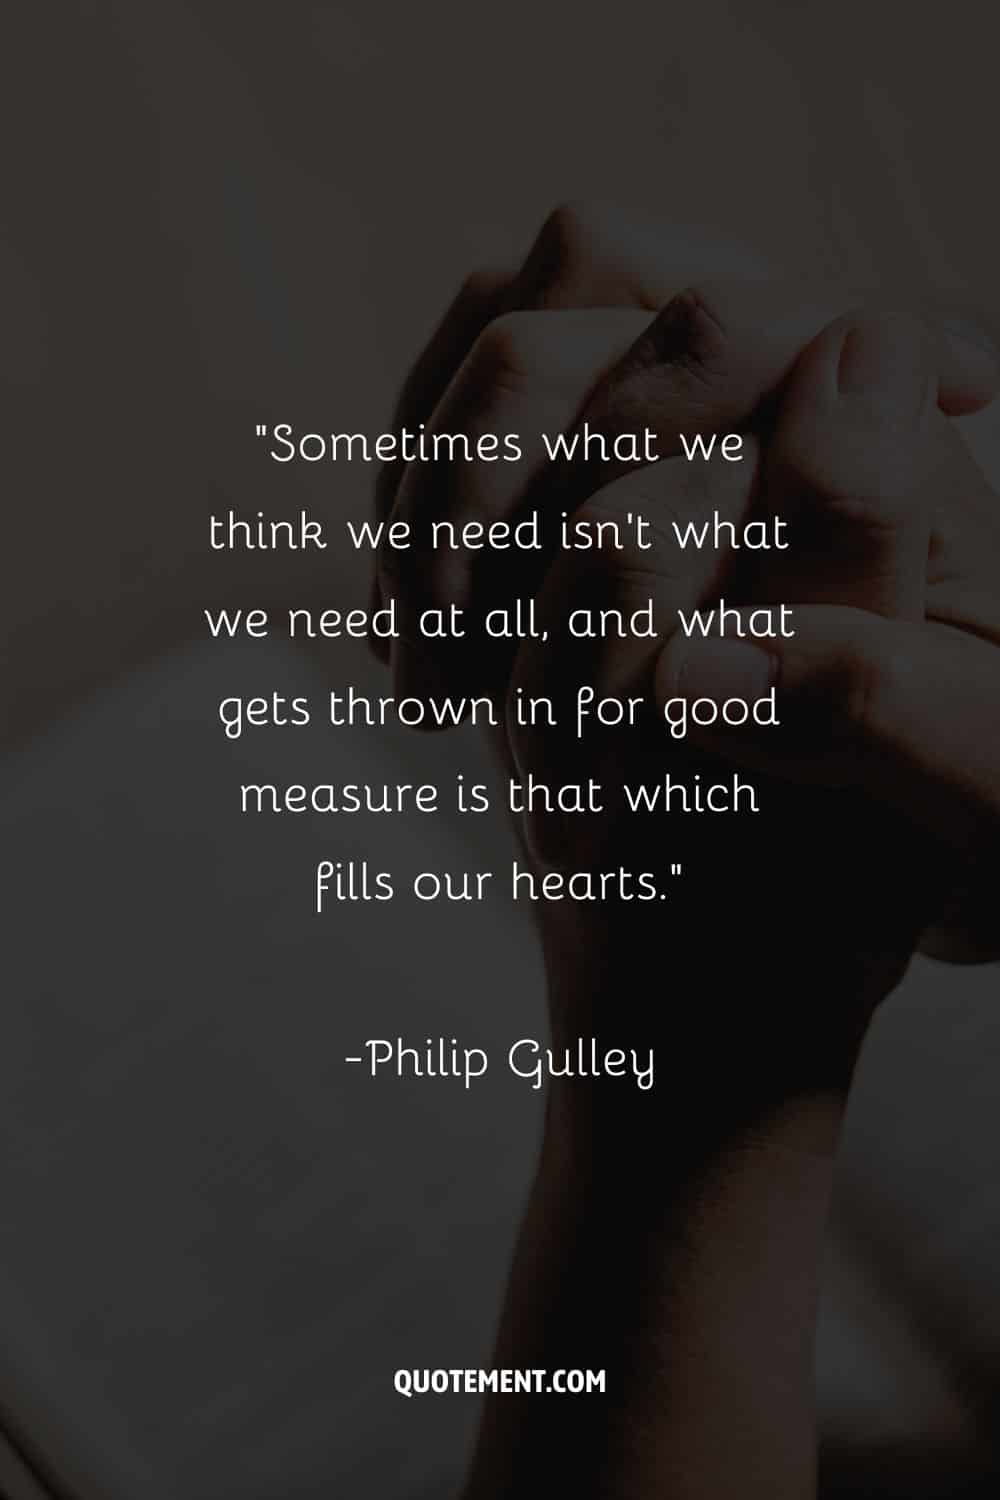 “Sometimes what we think we need isn’t what we need at all, and what gets thrown in for good measure is that which fills our hearts.”